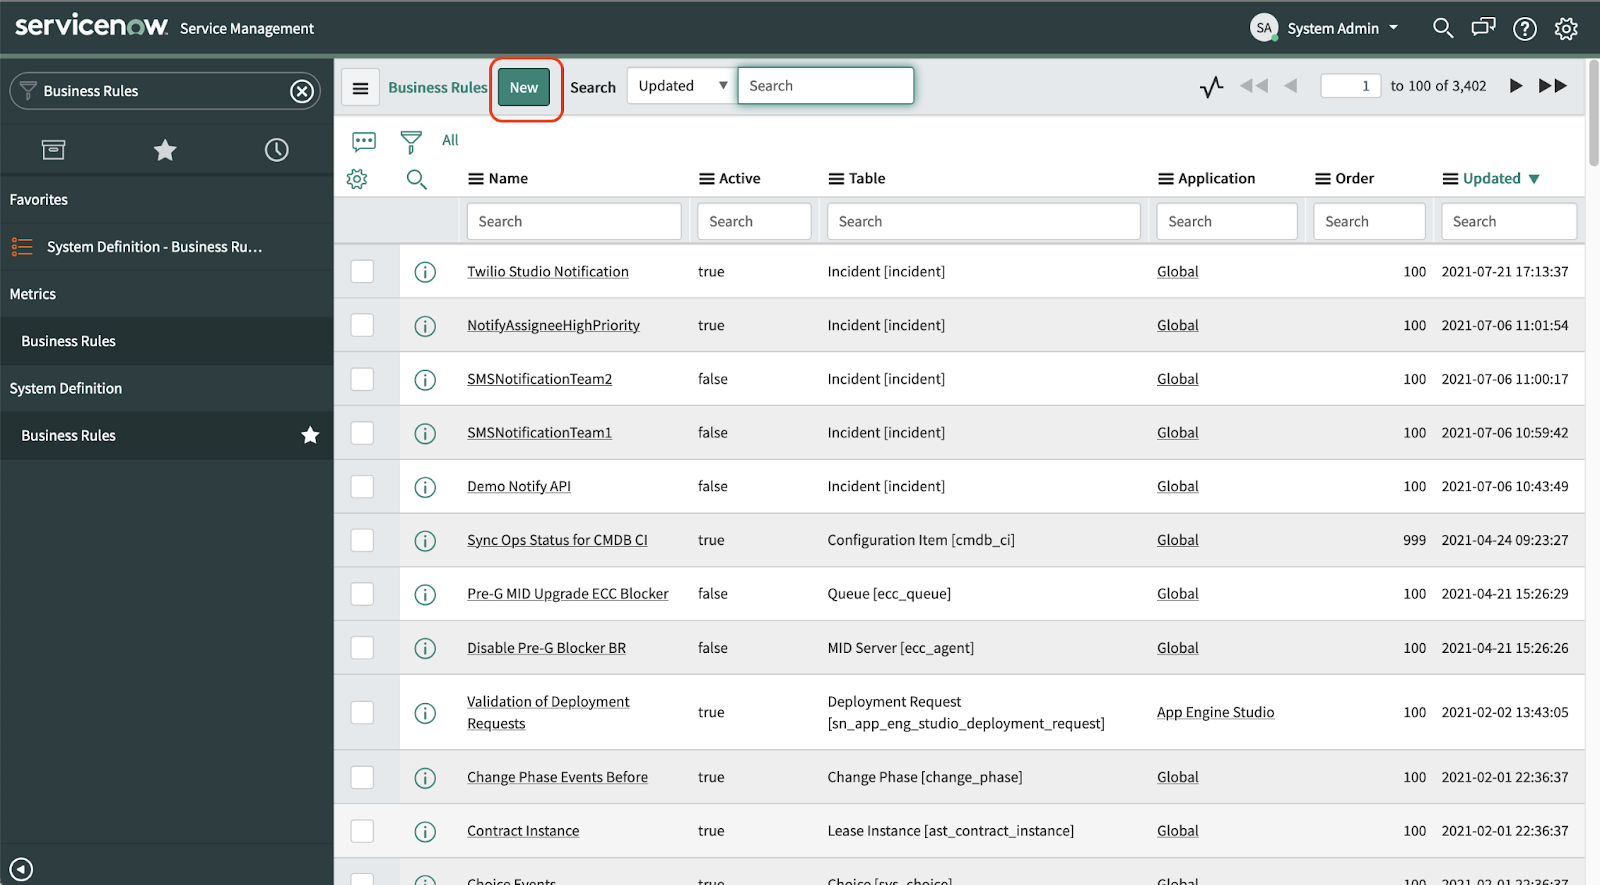 A screenshot of the Business Rules section of the ServiceNow dashboard